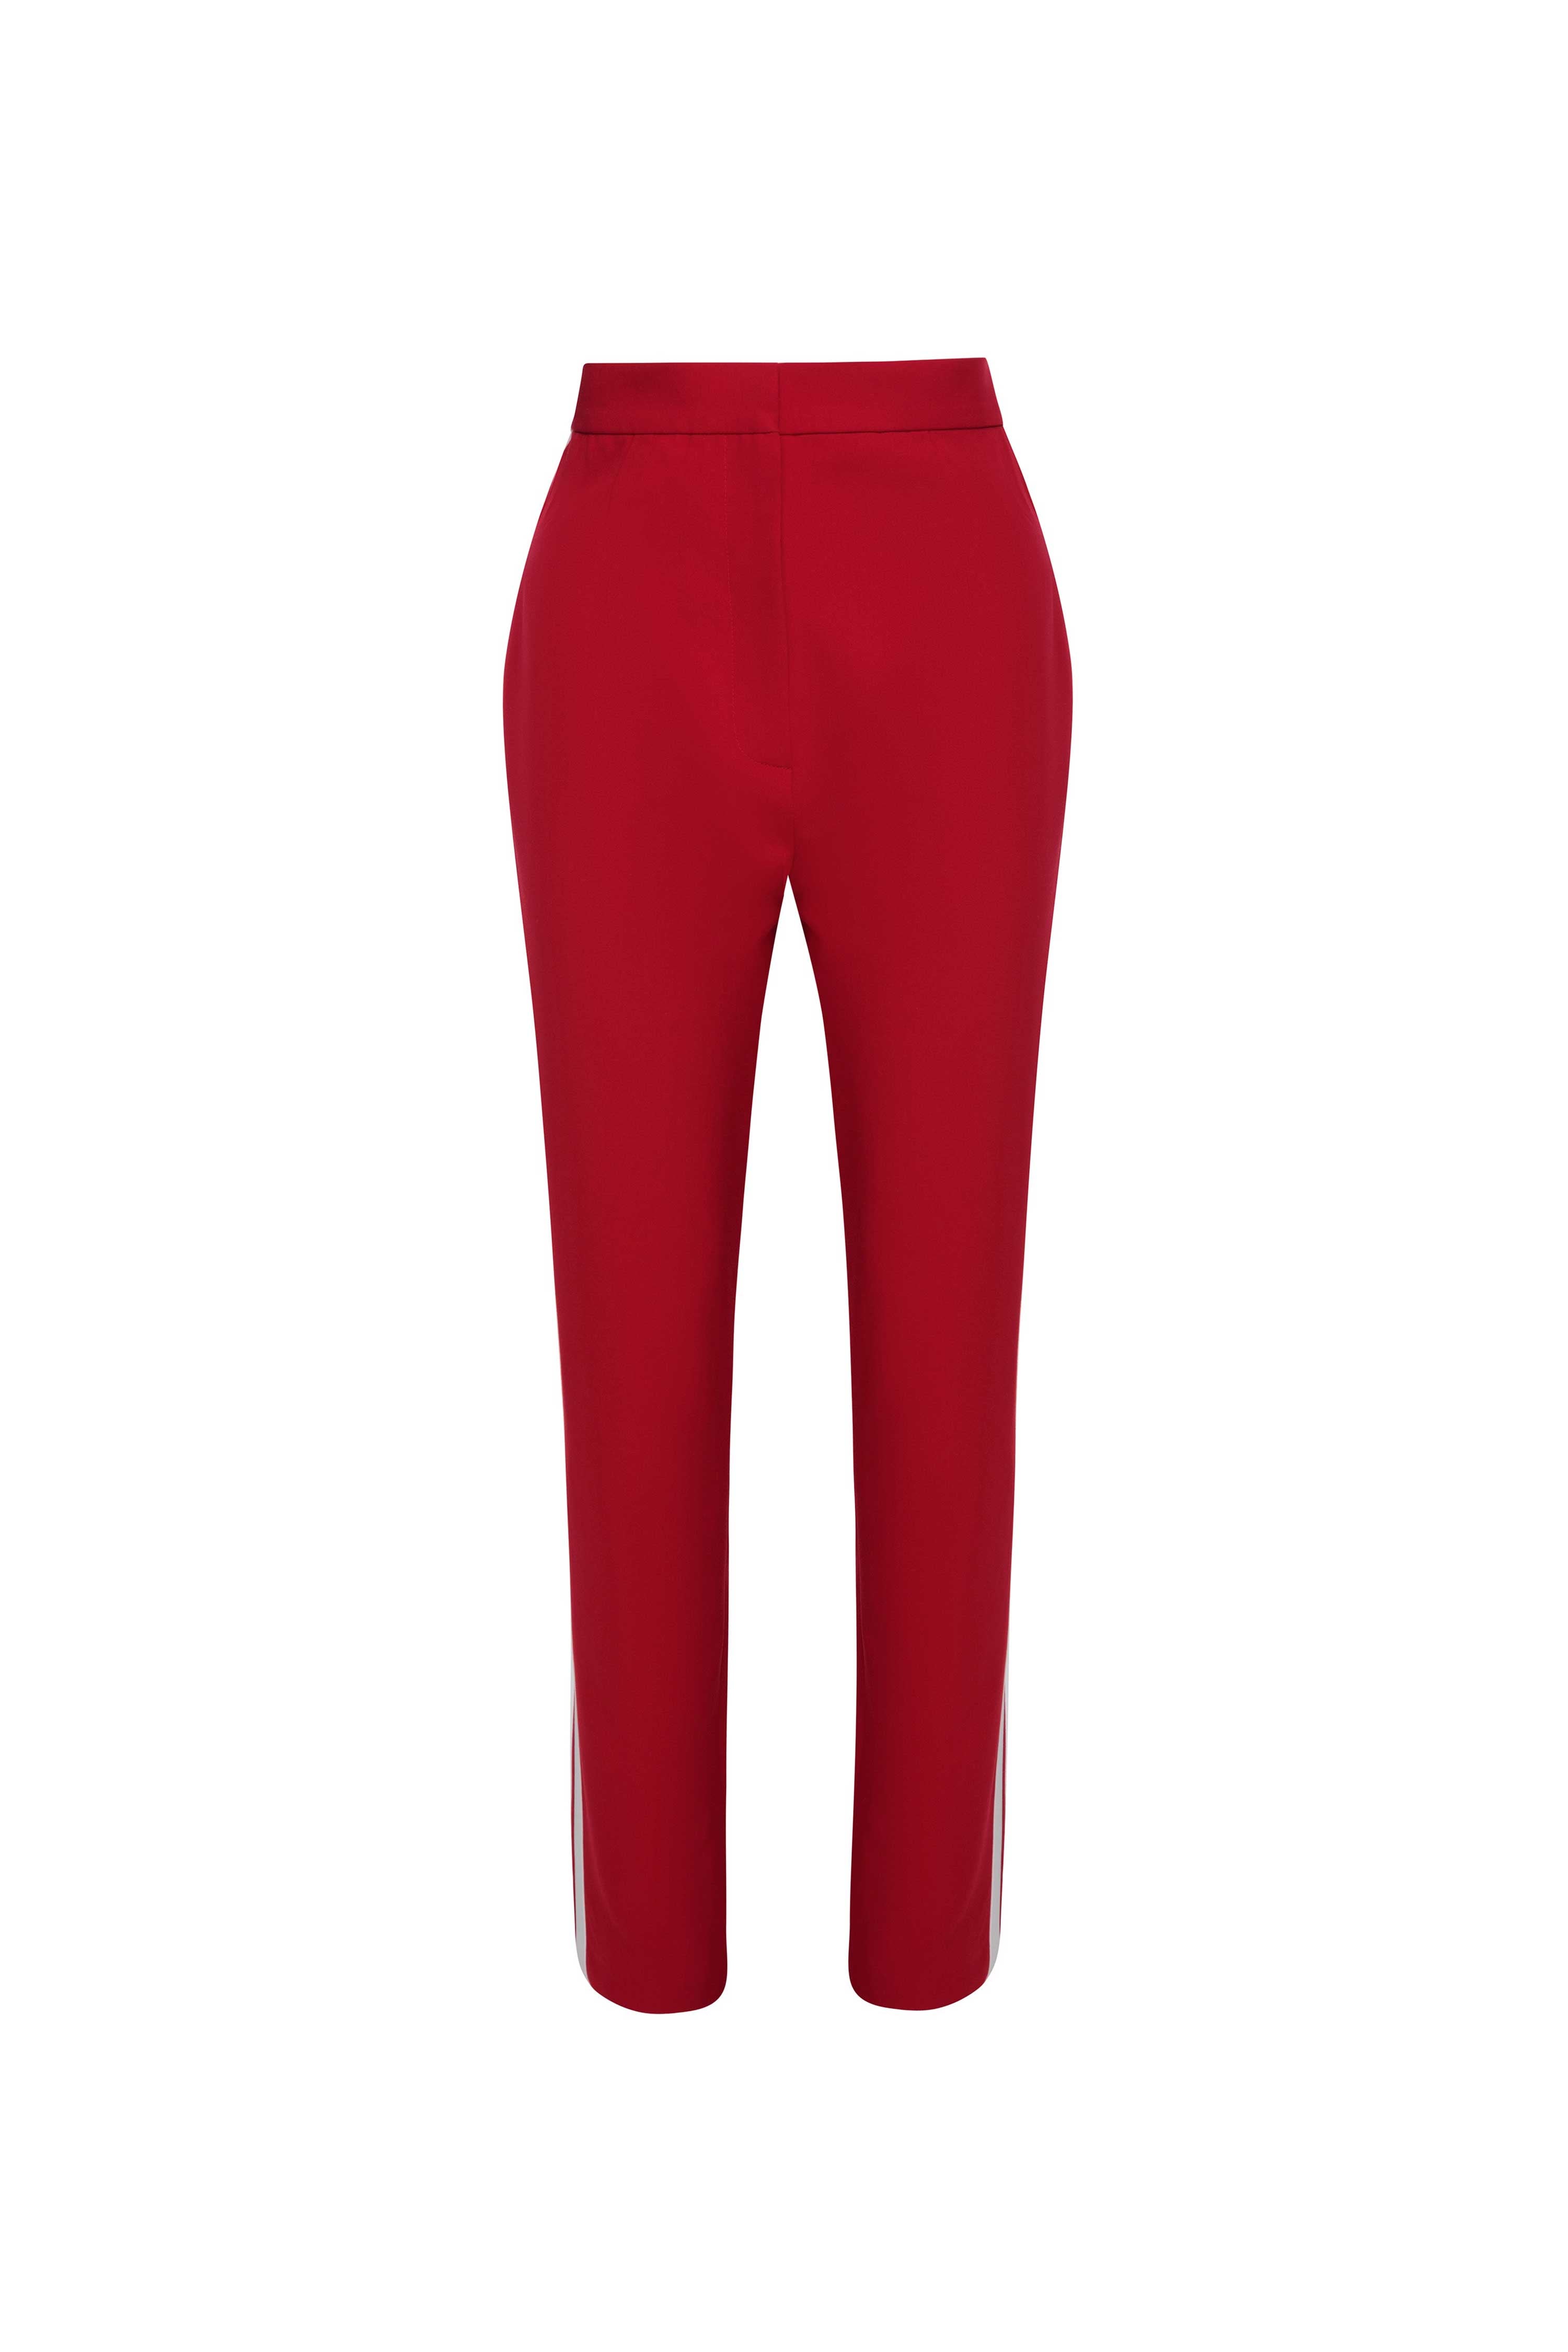 Red Energy pants